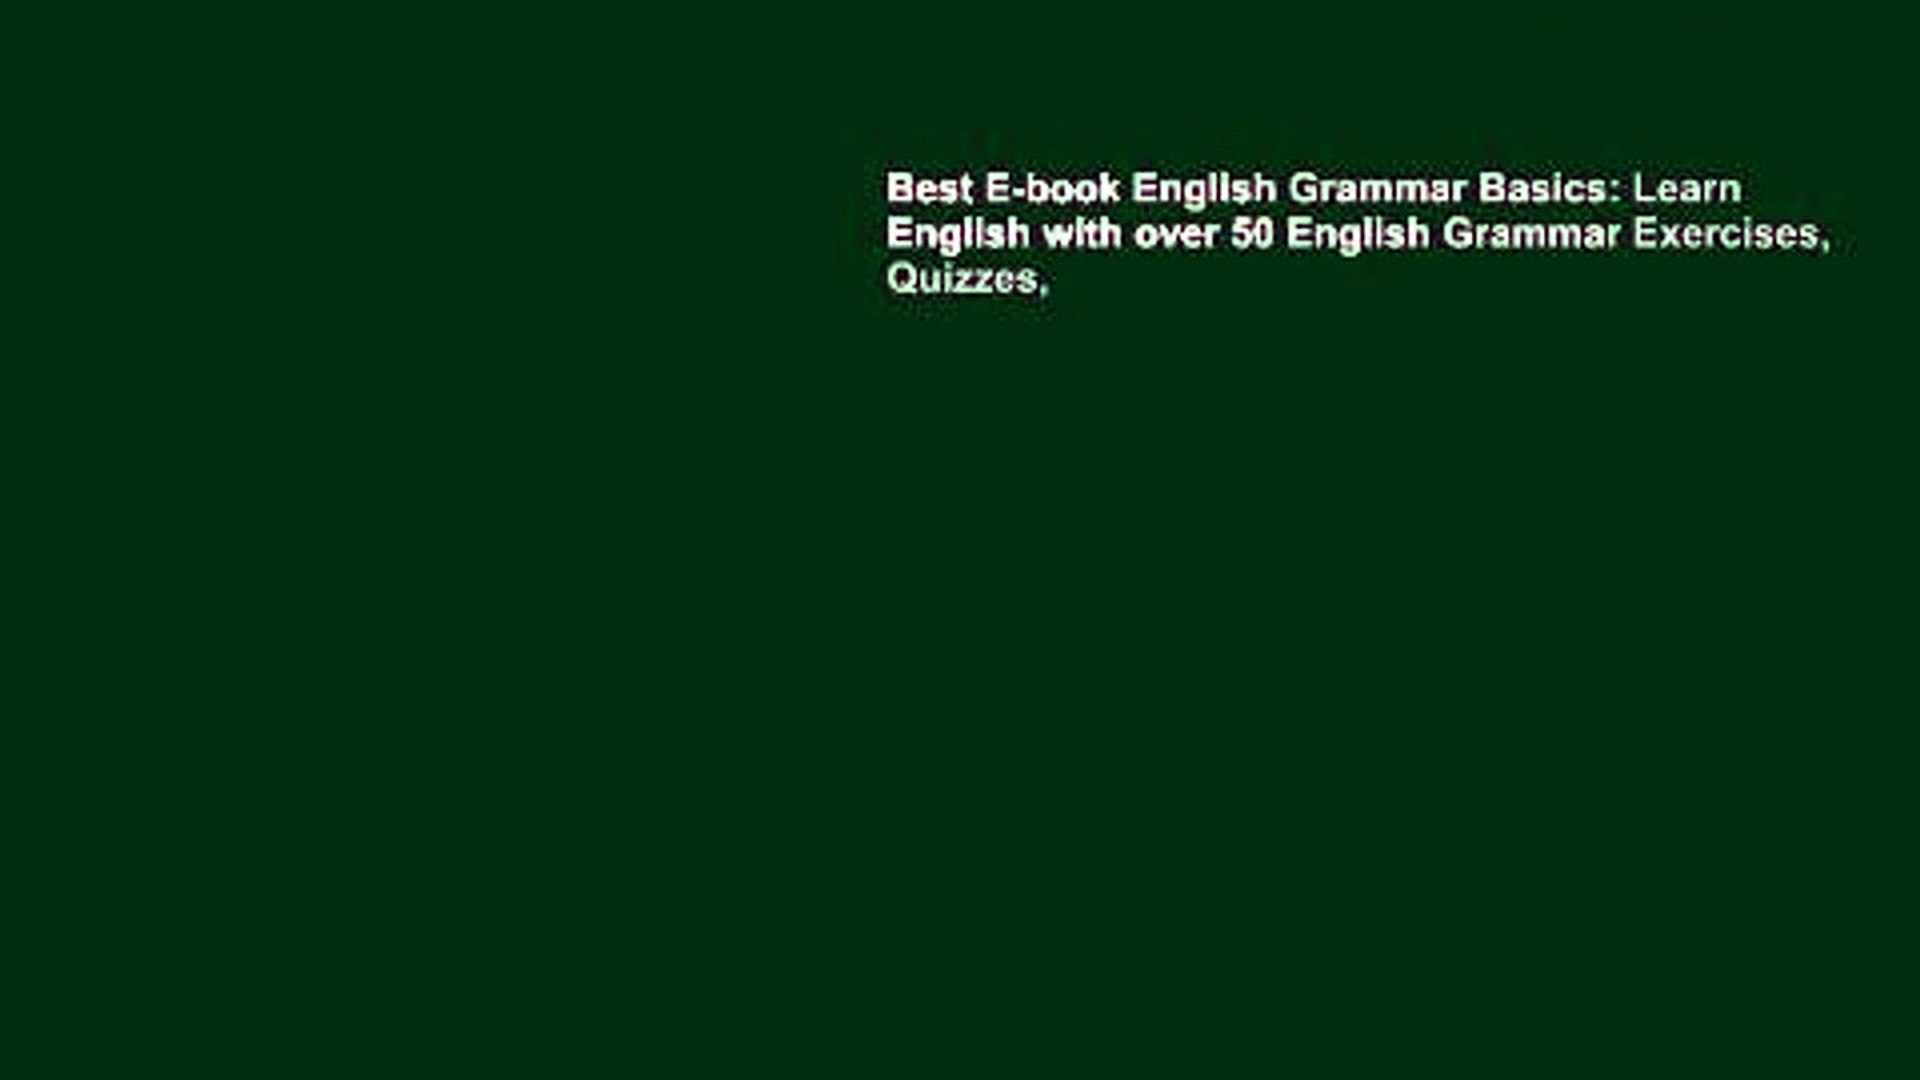 Best E-book English Grammar Basics: Learn English with over 50 English Grammar Exercises, Quizzes,